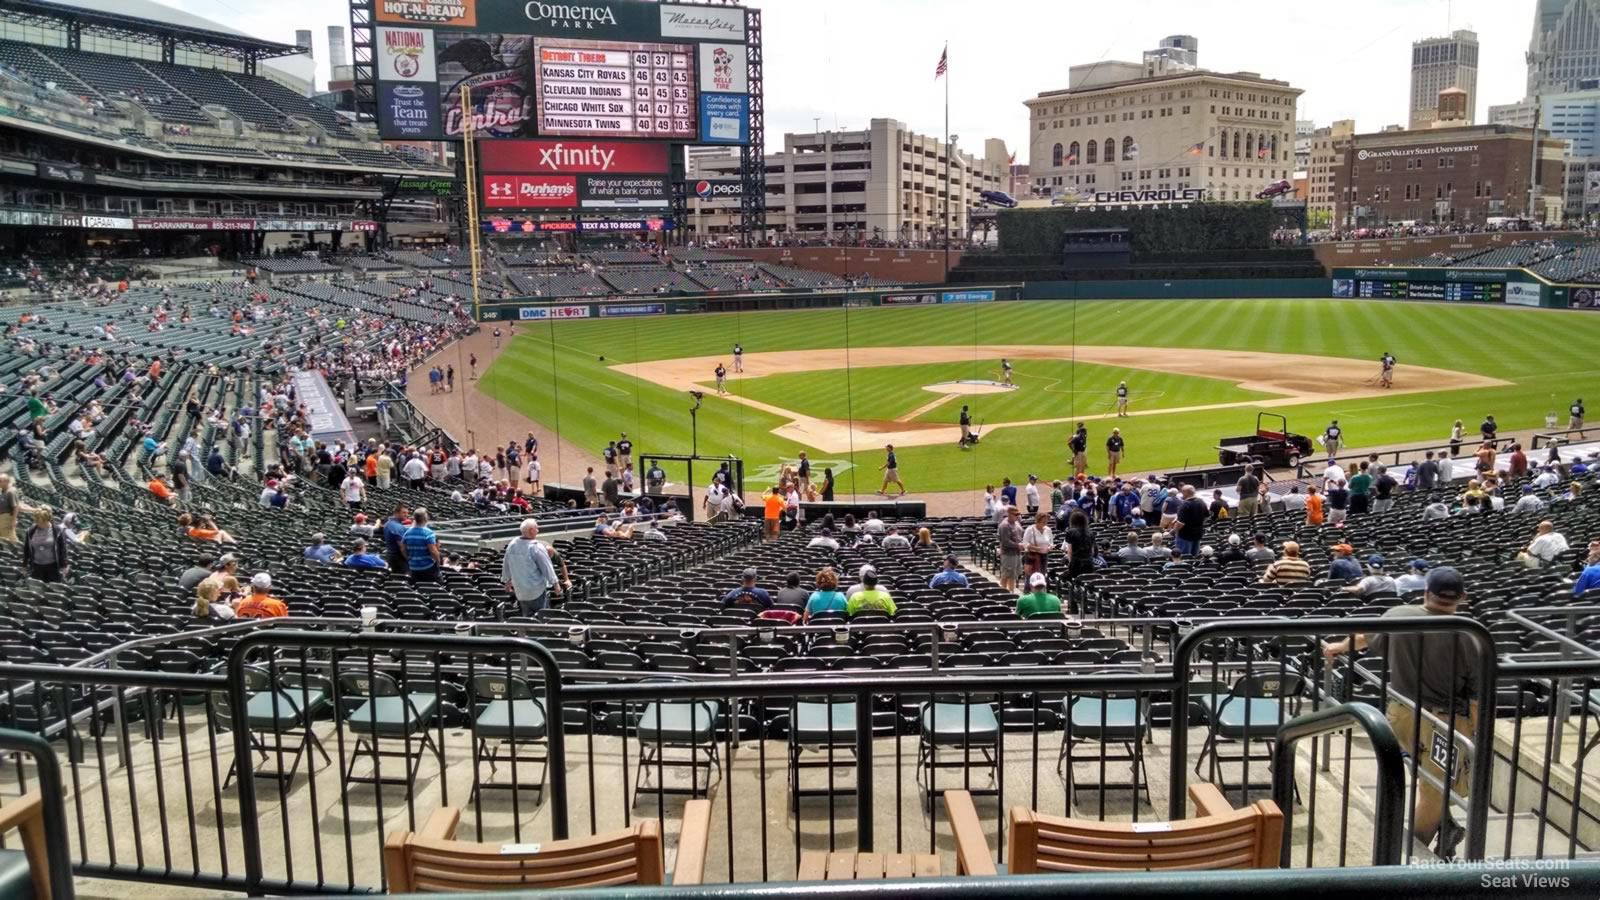 Where is Section 126B at Comerica Park?